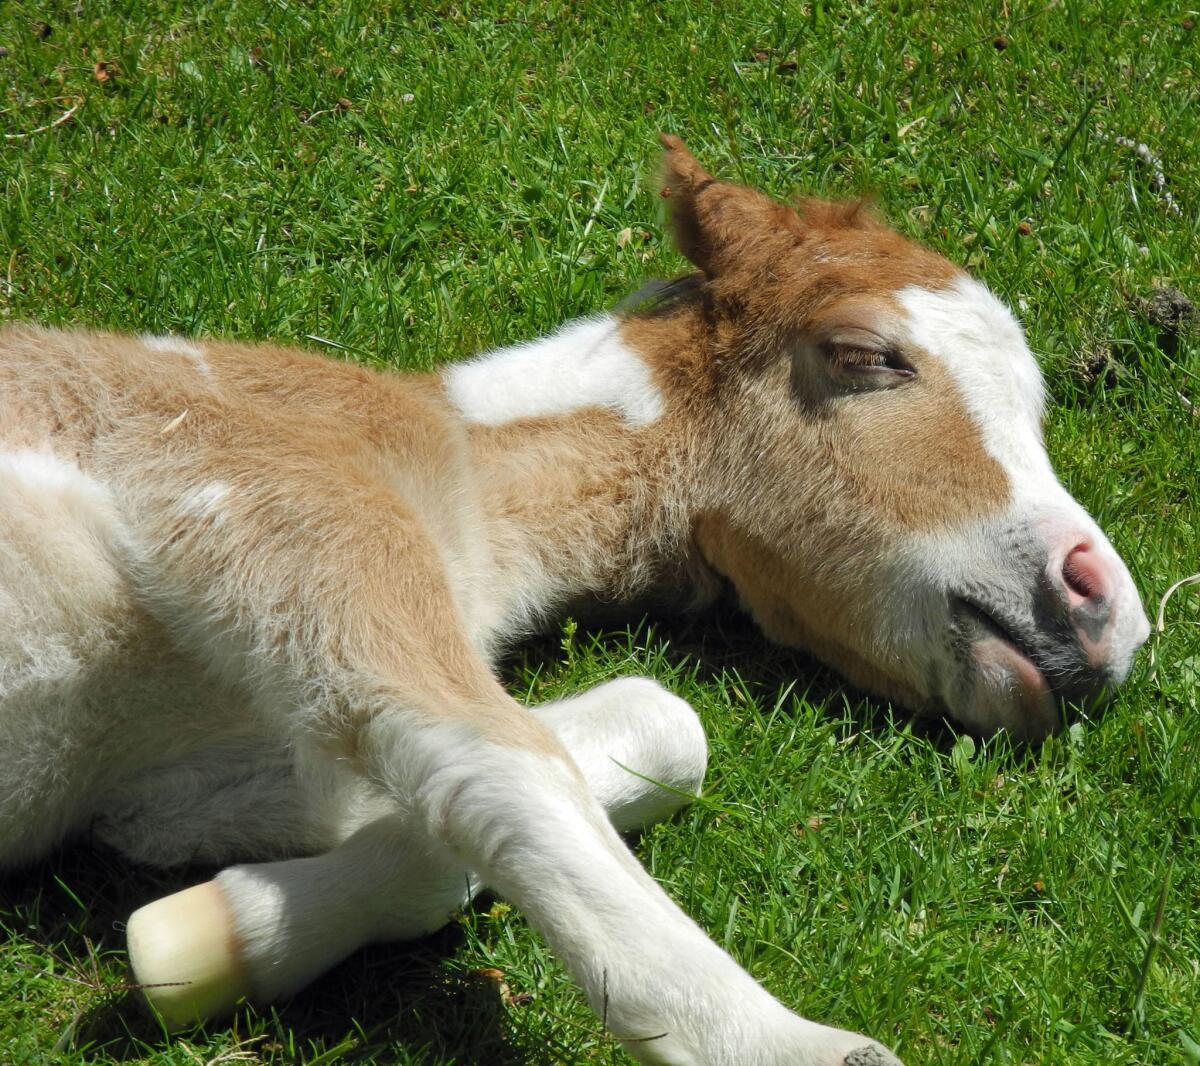 See miniature horses, like this one, and, if you're lucky, their foals at Quicksilver Ranch, near Solvang, Calif.